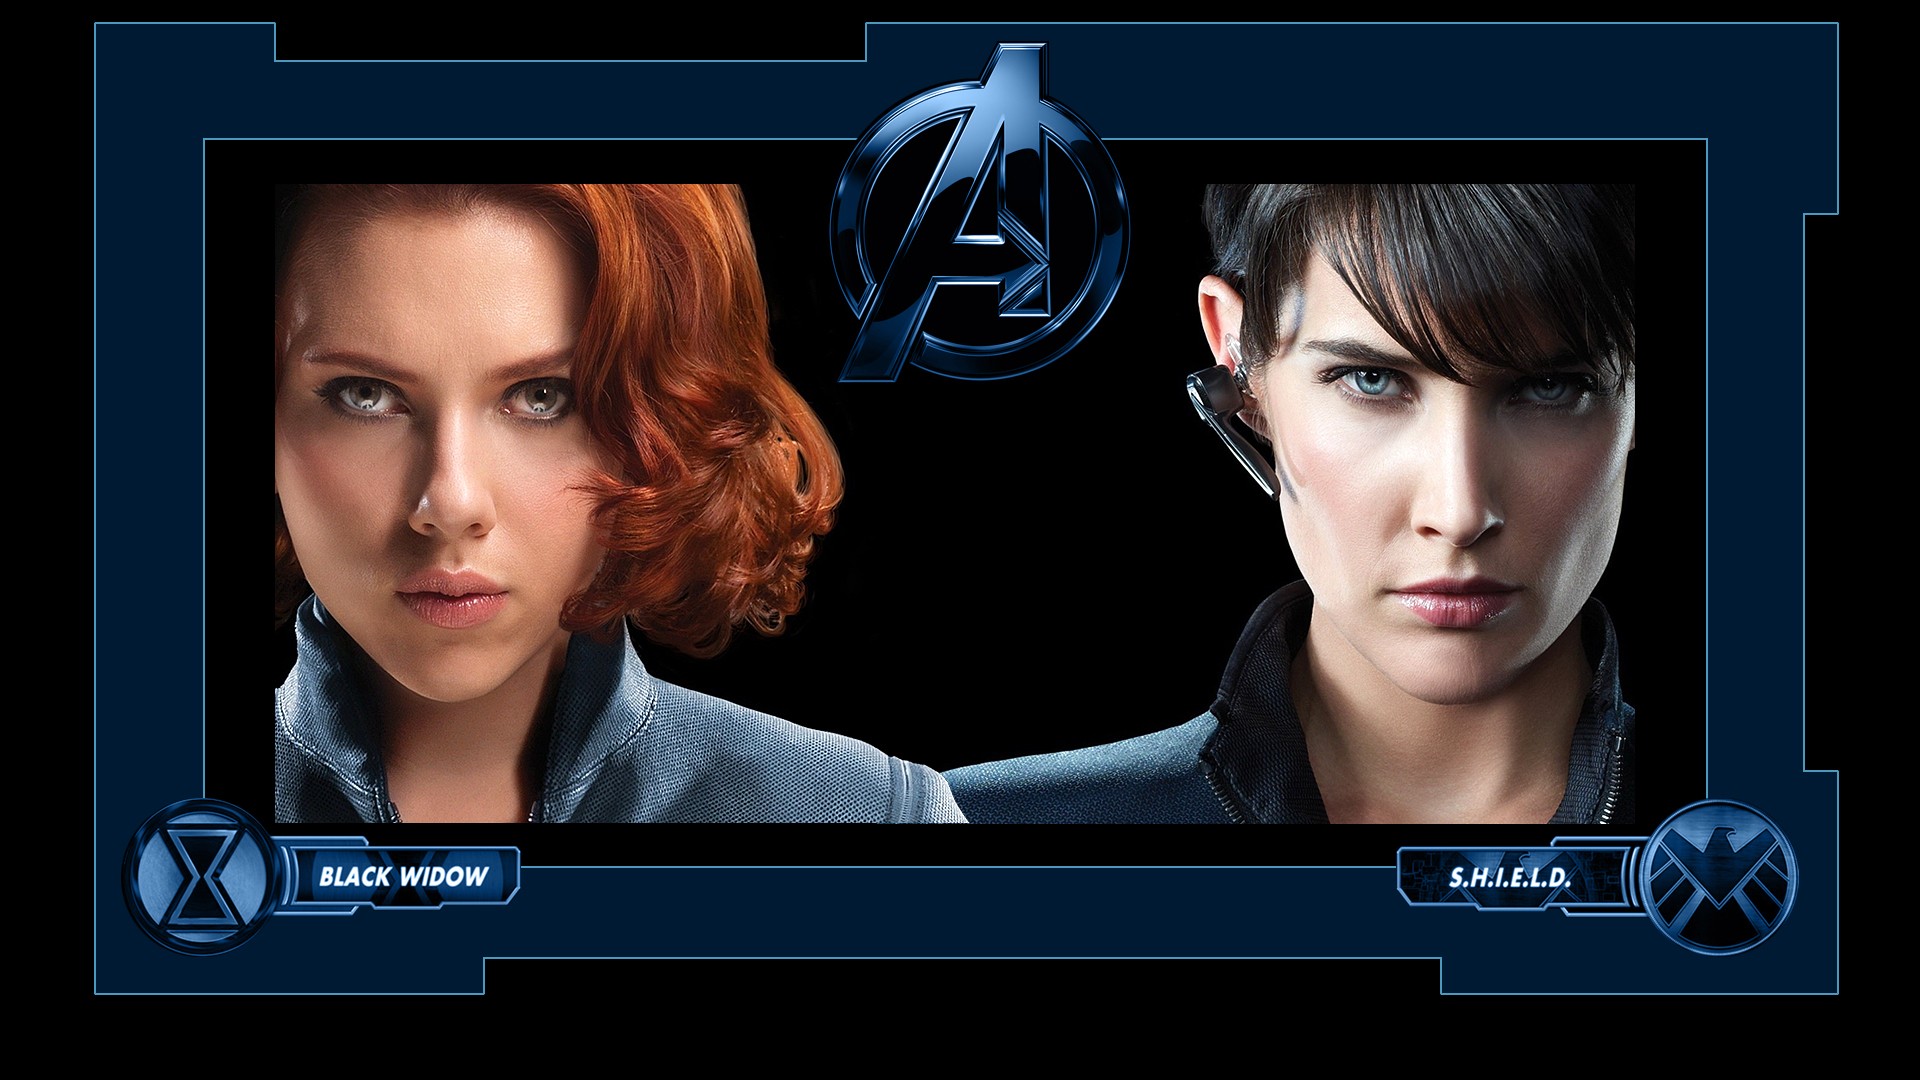 People 1920x1080 movies Black Widow Maria Hill Scarlett Johansson Cobie Smulders The Avengers S.H.I.E.L.D. two women Marvel Cinematic Universe dark hair redhead looking at viewer women